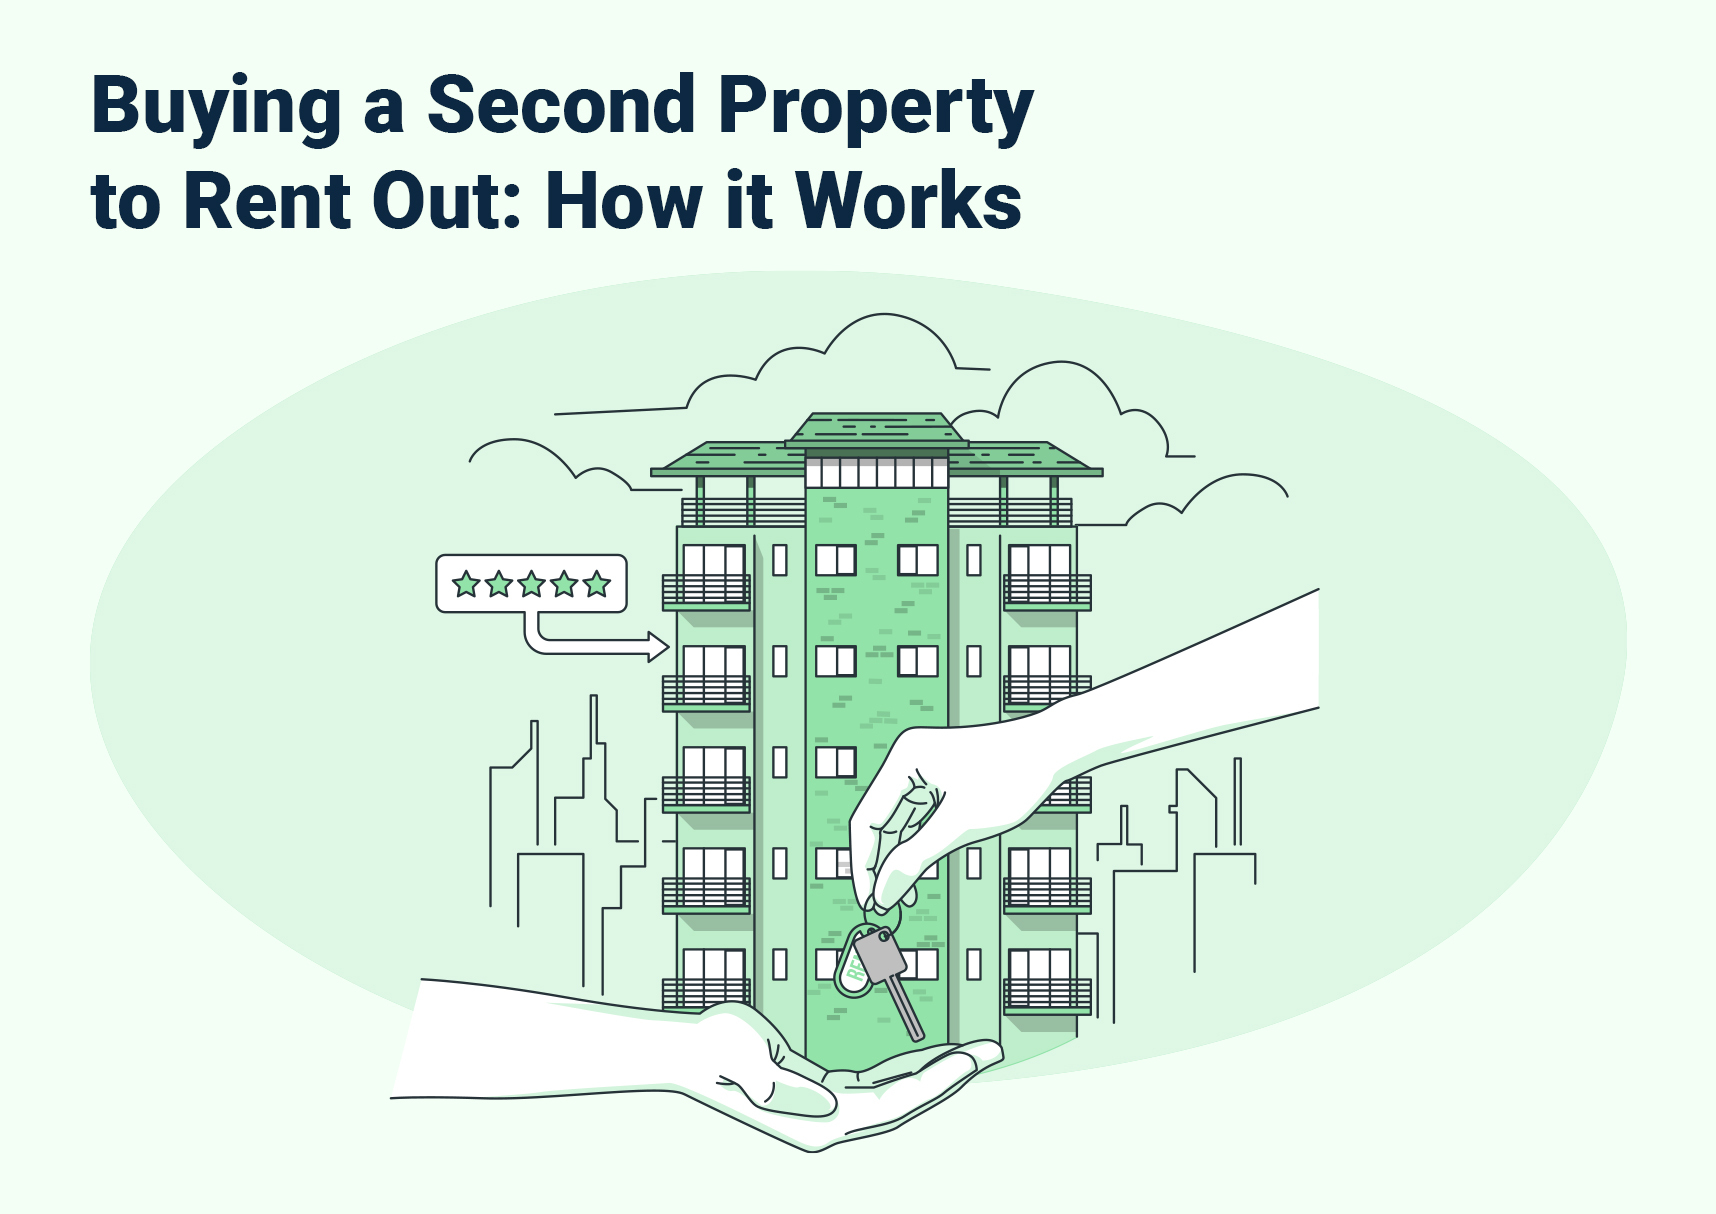 Buying a Second Property to Rent Out: How it Works